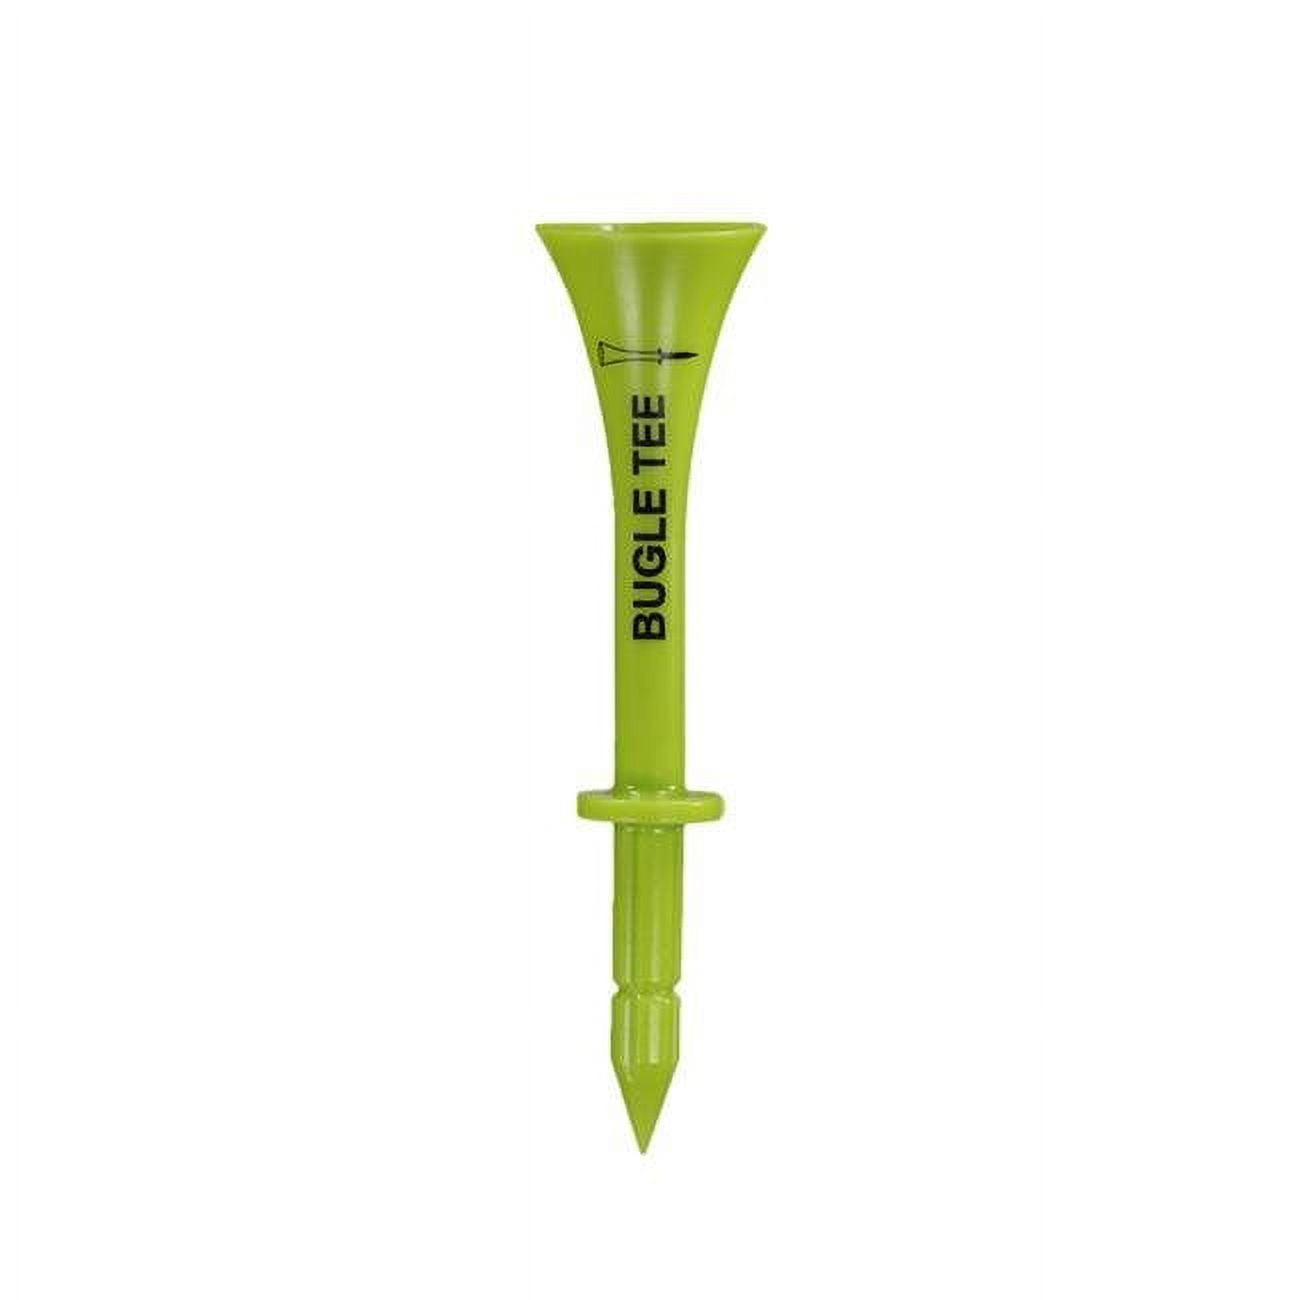 Picture of Bugle Tee 793573047540 3.25 in. Golf Tee, Green 